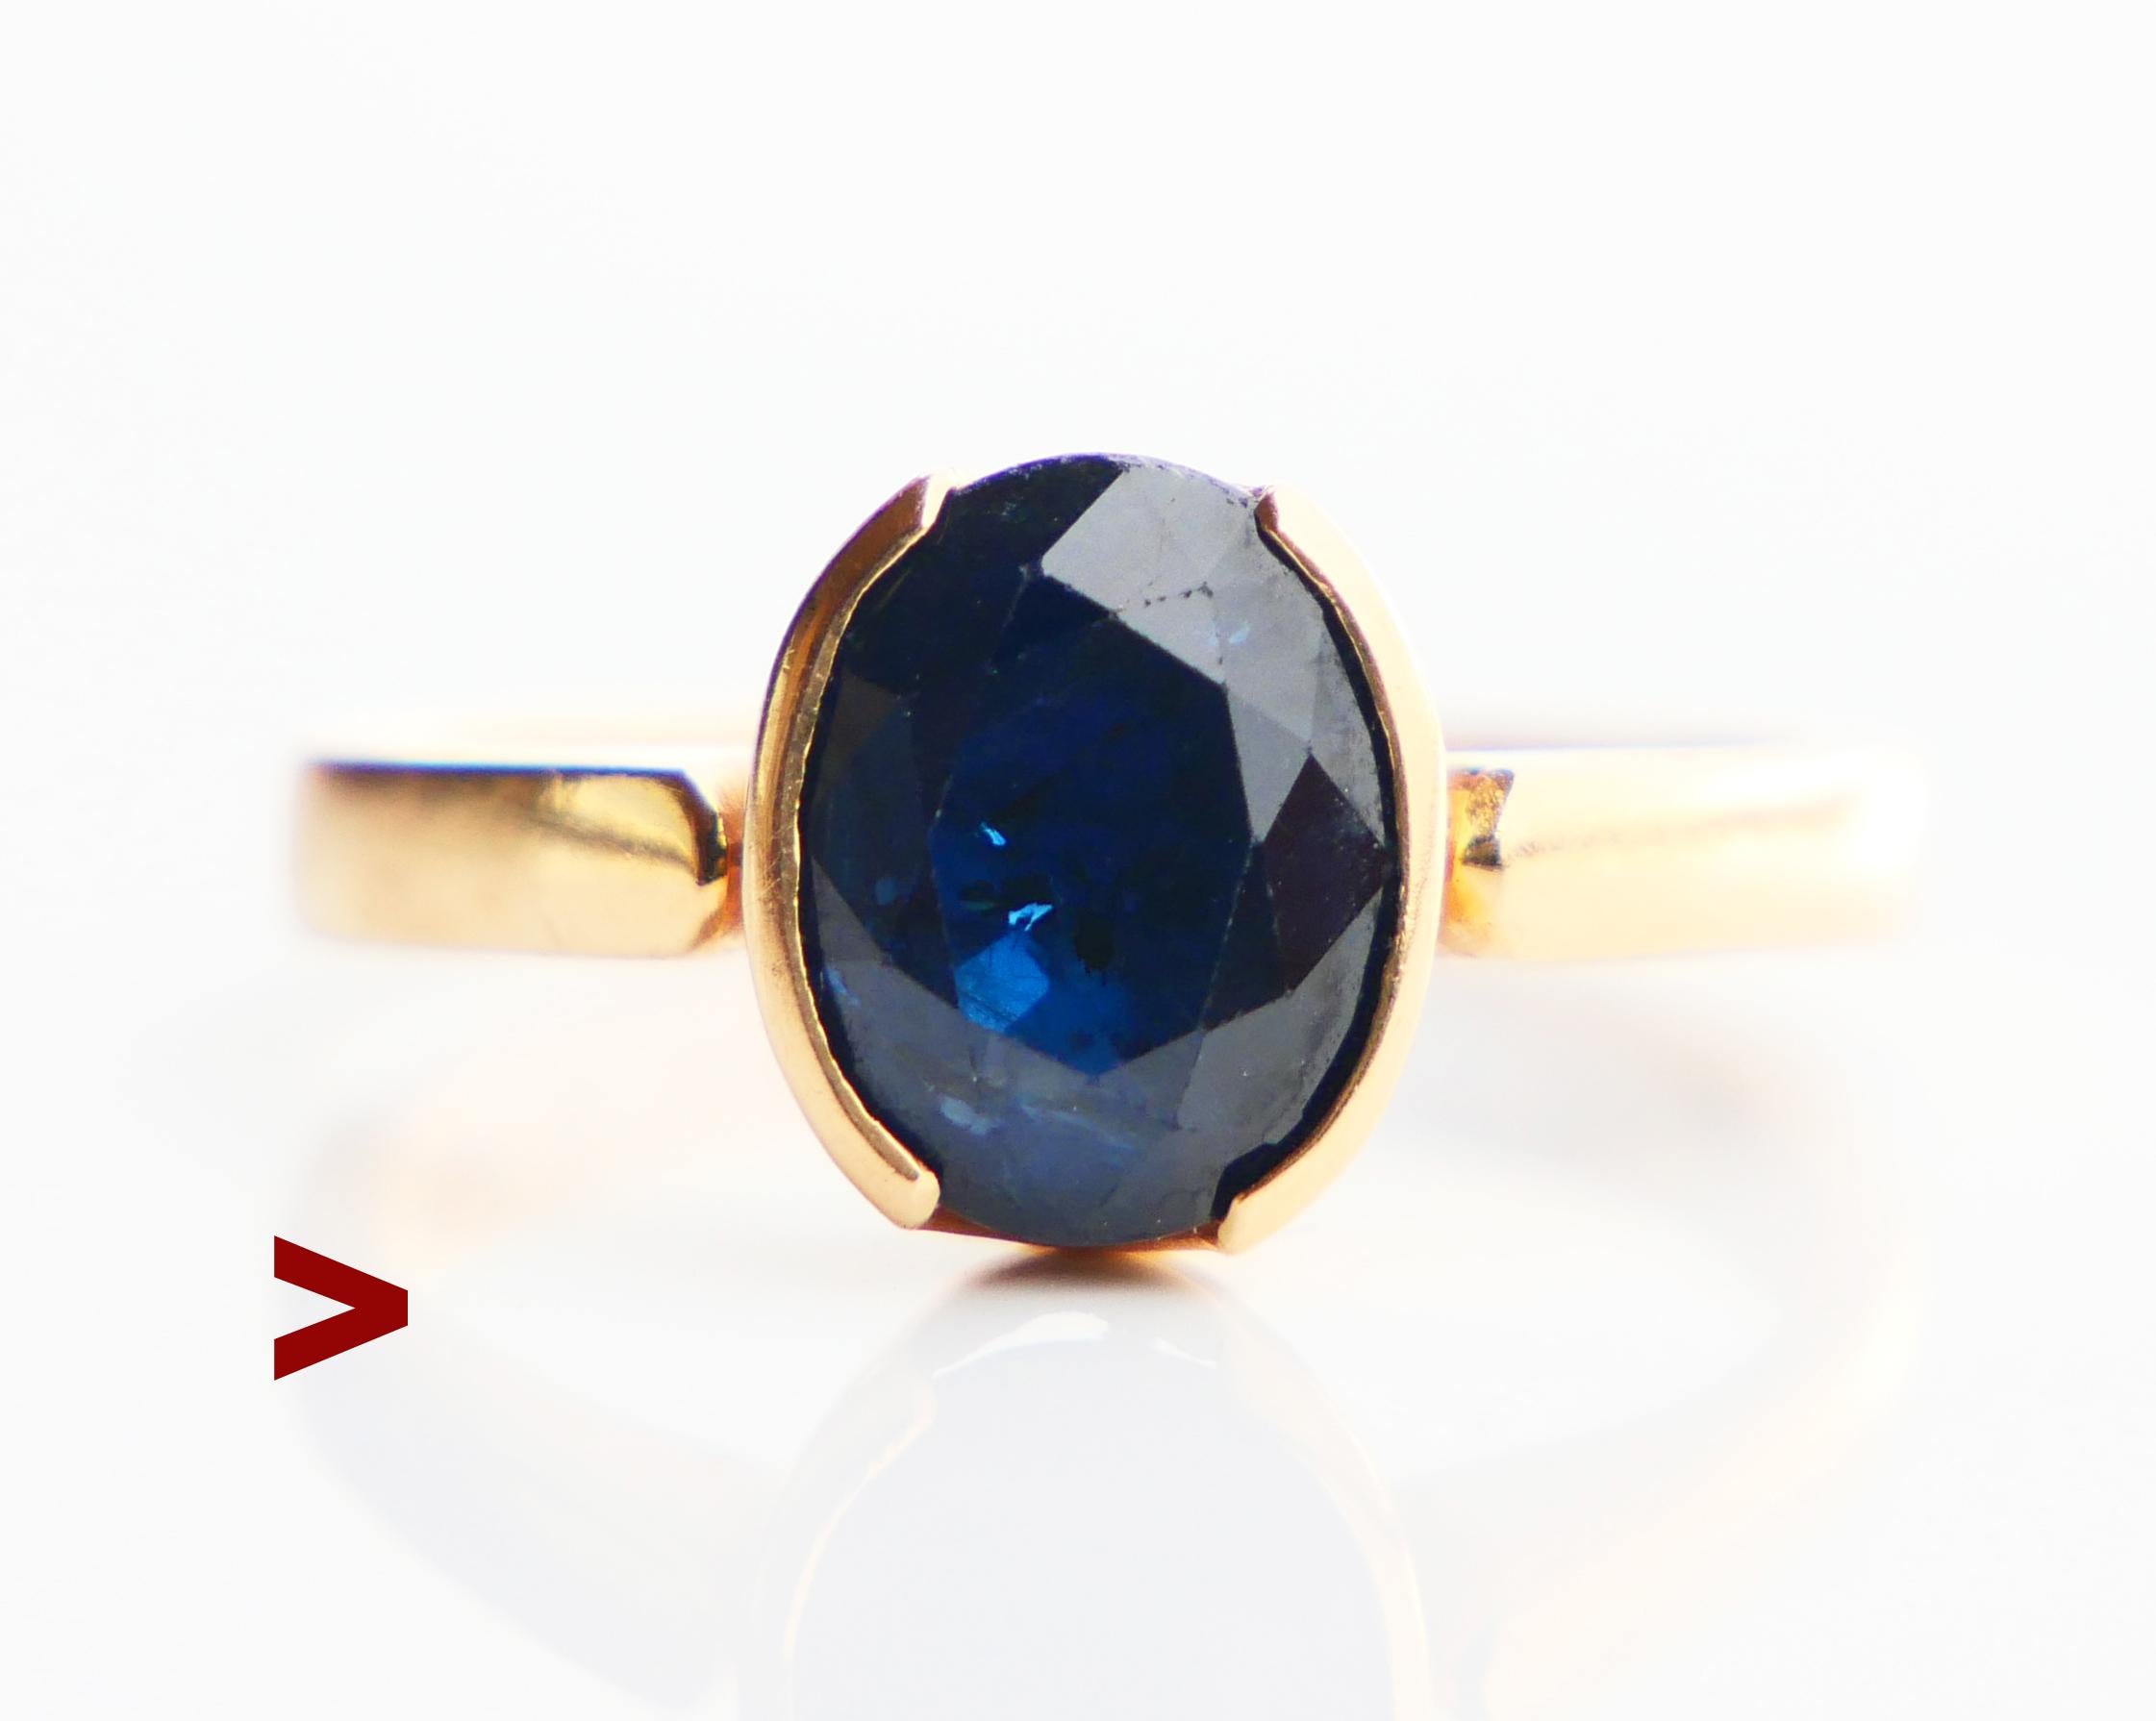 A ring with band in solid 18K Yellow Gold and oval cut natural Sapphire 9 mm x 7 mm x 4.6 mm deep / ca. 2.25 ct. The stone is dark Blue with flaws and inclusions visible inside.

Hallmarked 18K, made in Sweden in 1997 (Year Combination Y10 )

Size Ø